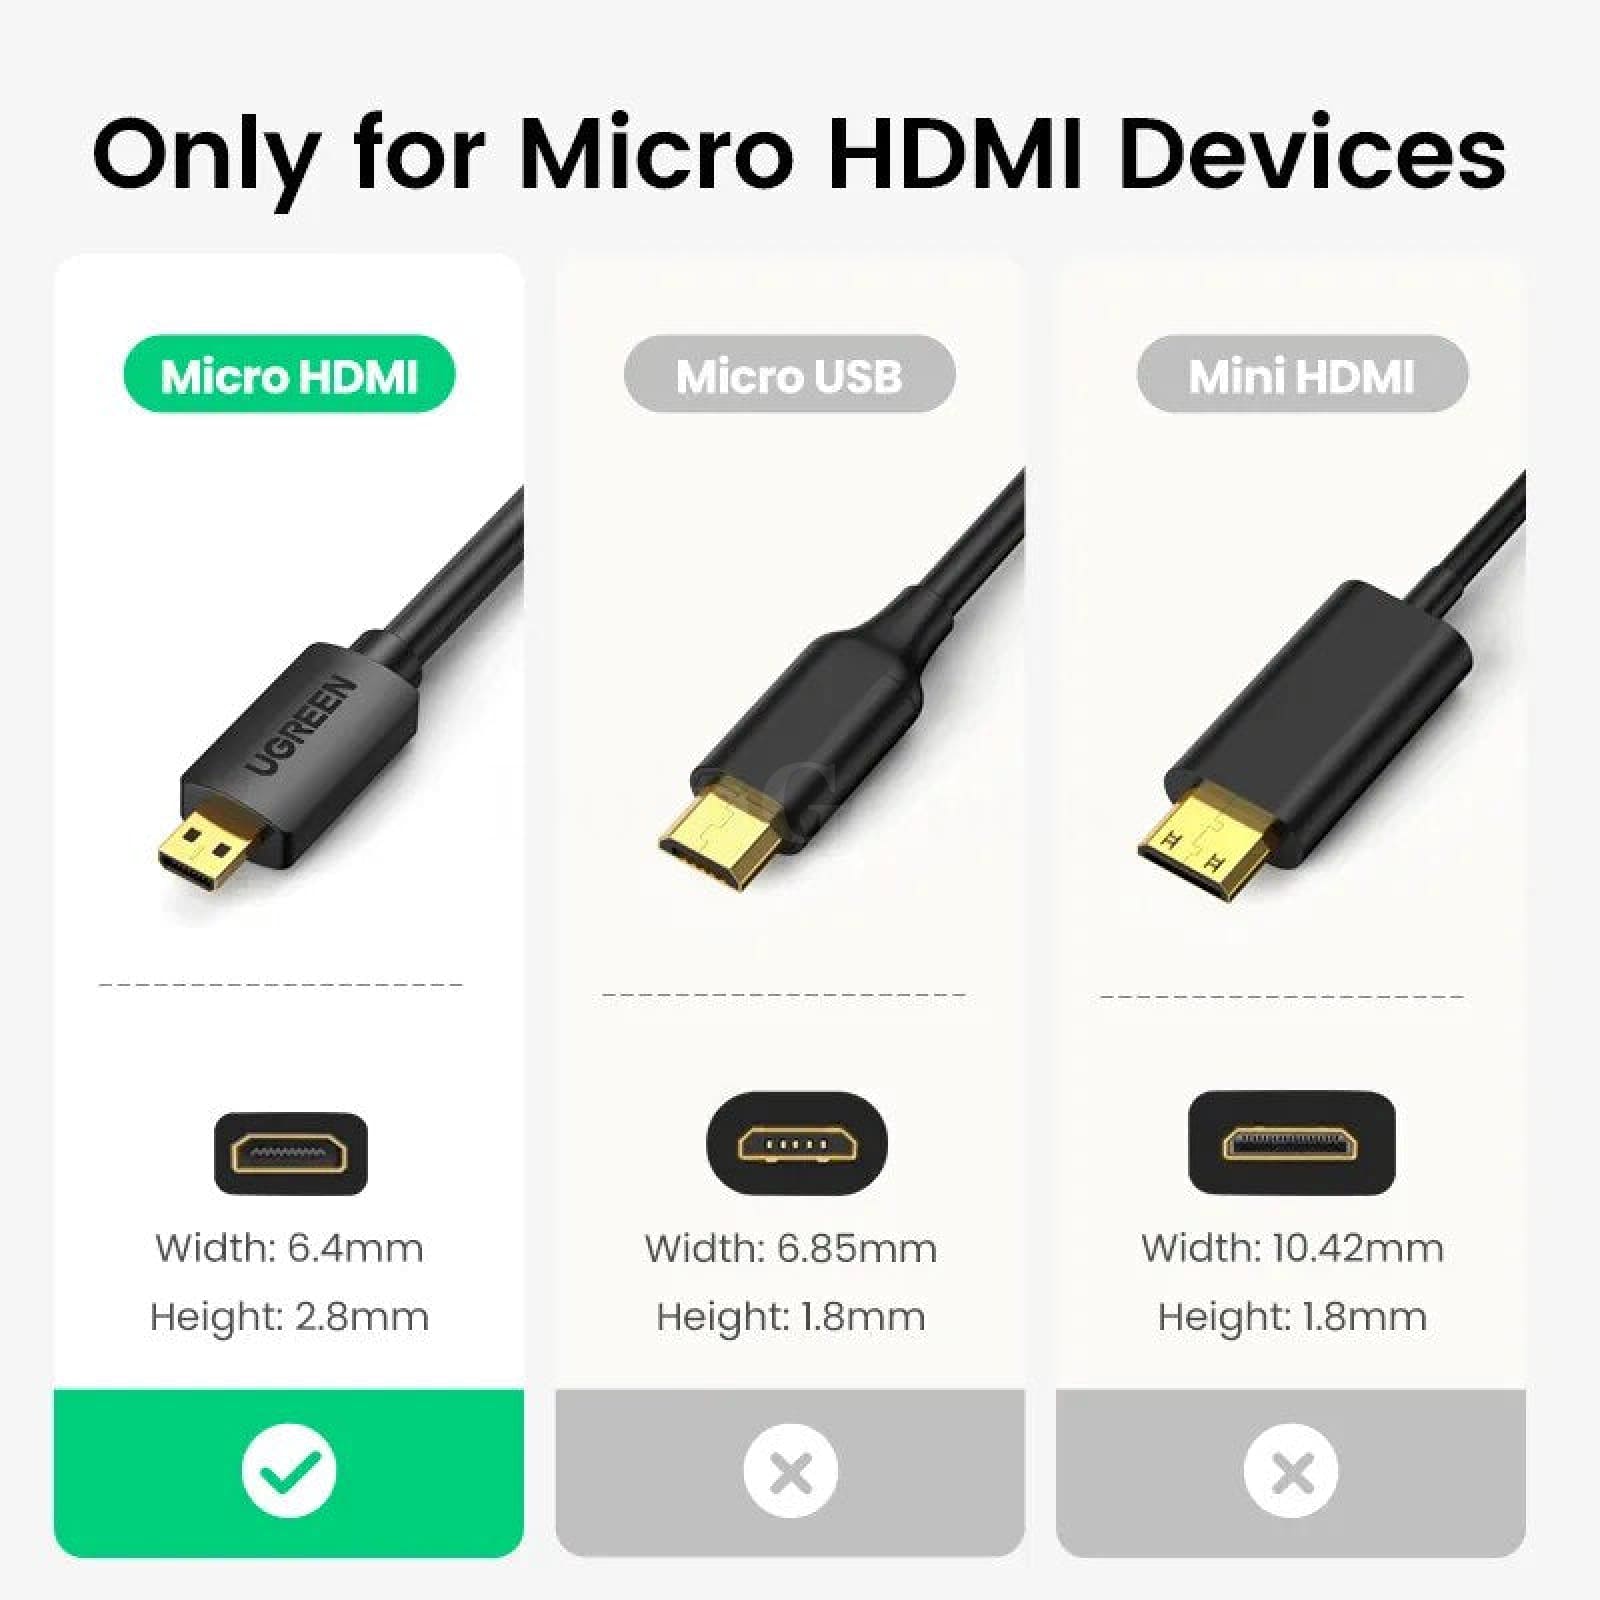 Ugreen Micro Hdmi-Compatible Cable - 4K/60Hz 3D Effect Male To For Gopro Sony Projector 301635